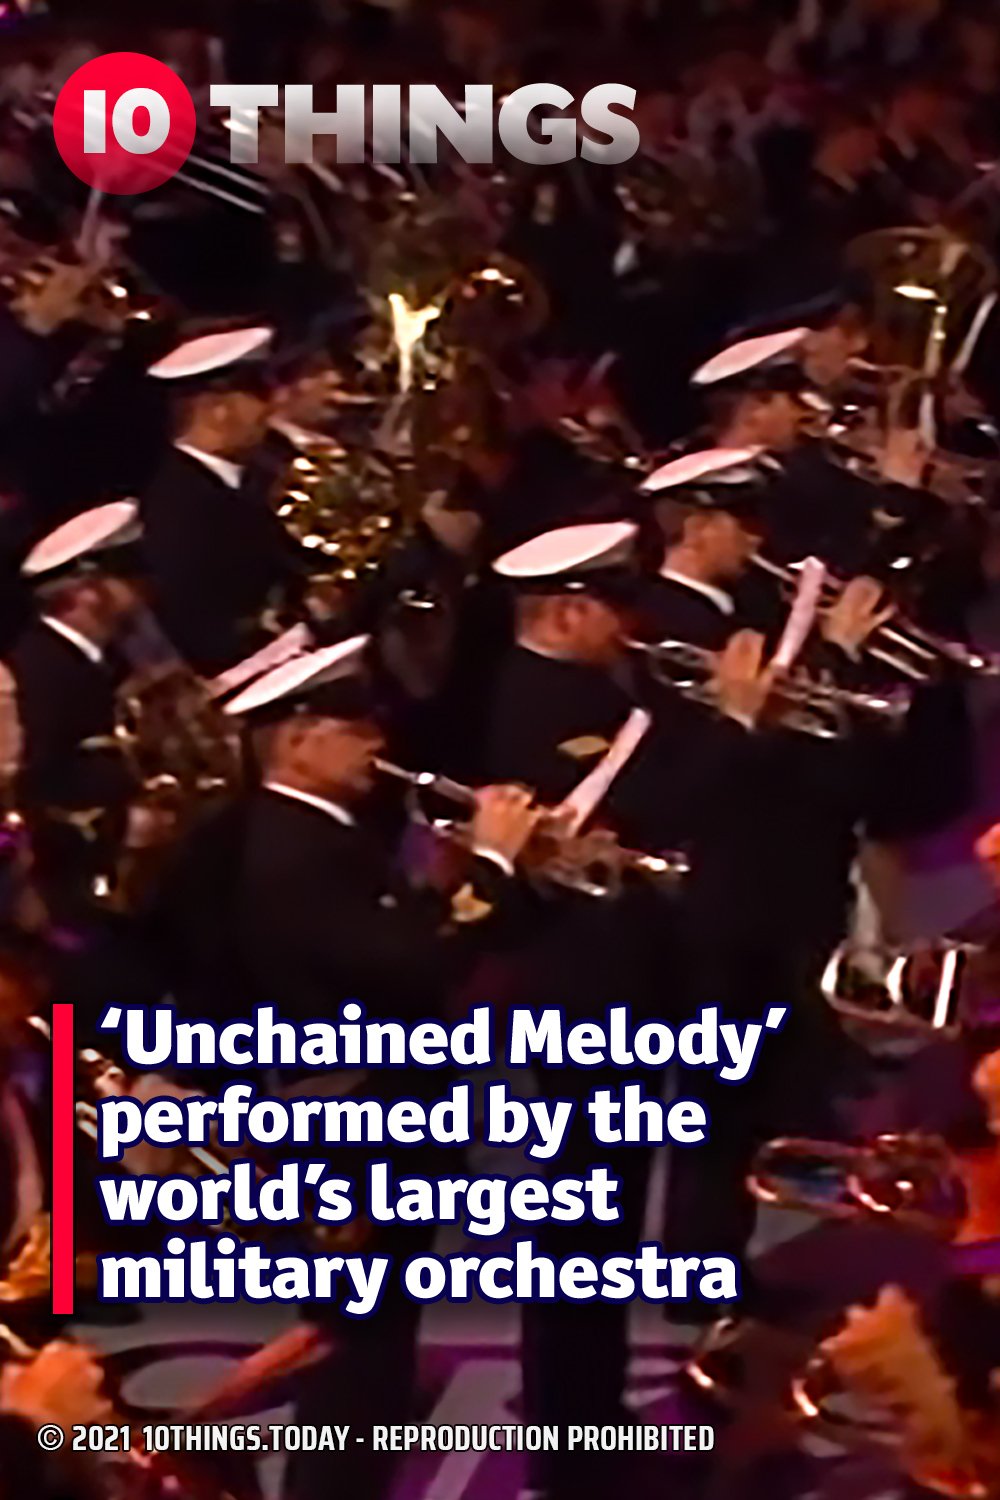 ‘Unchained Melody’ performed by the world’s largest military orchestra